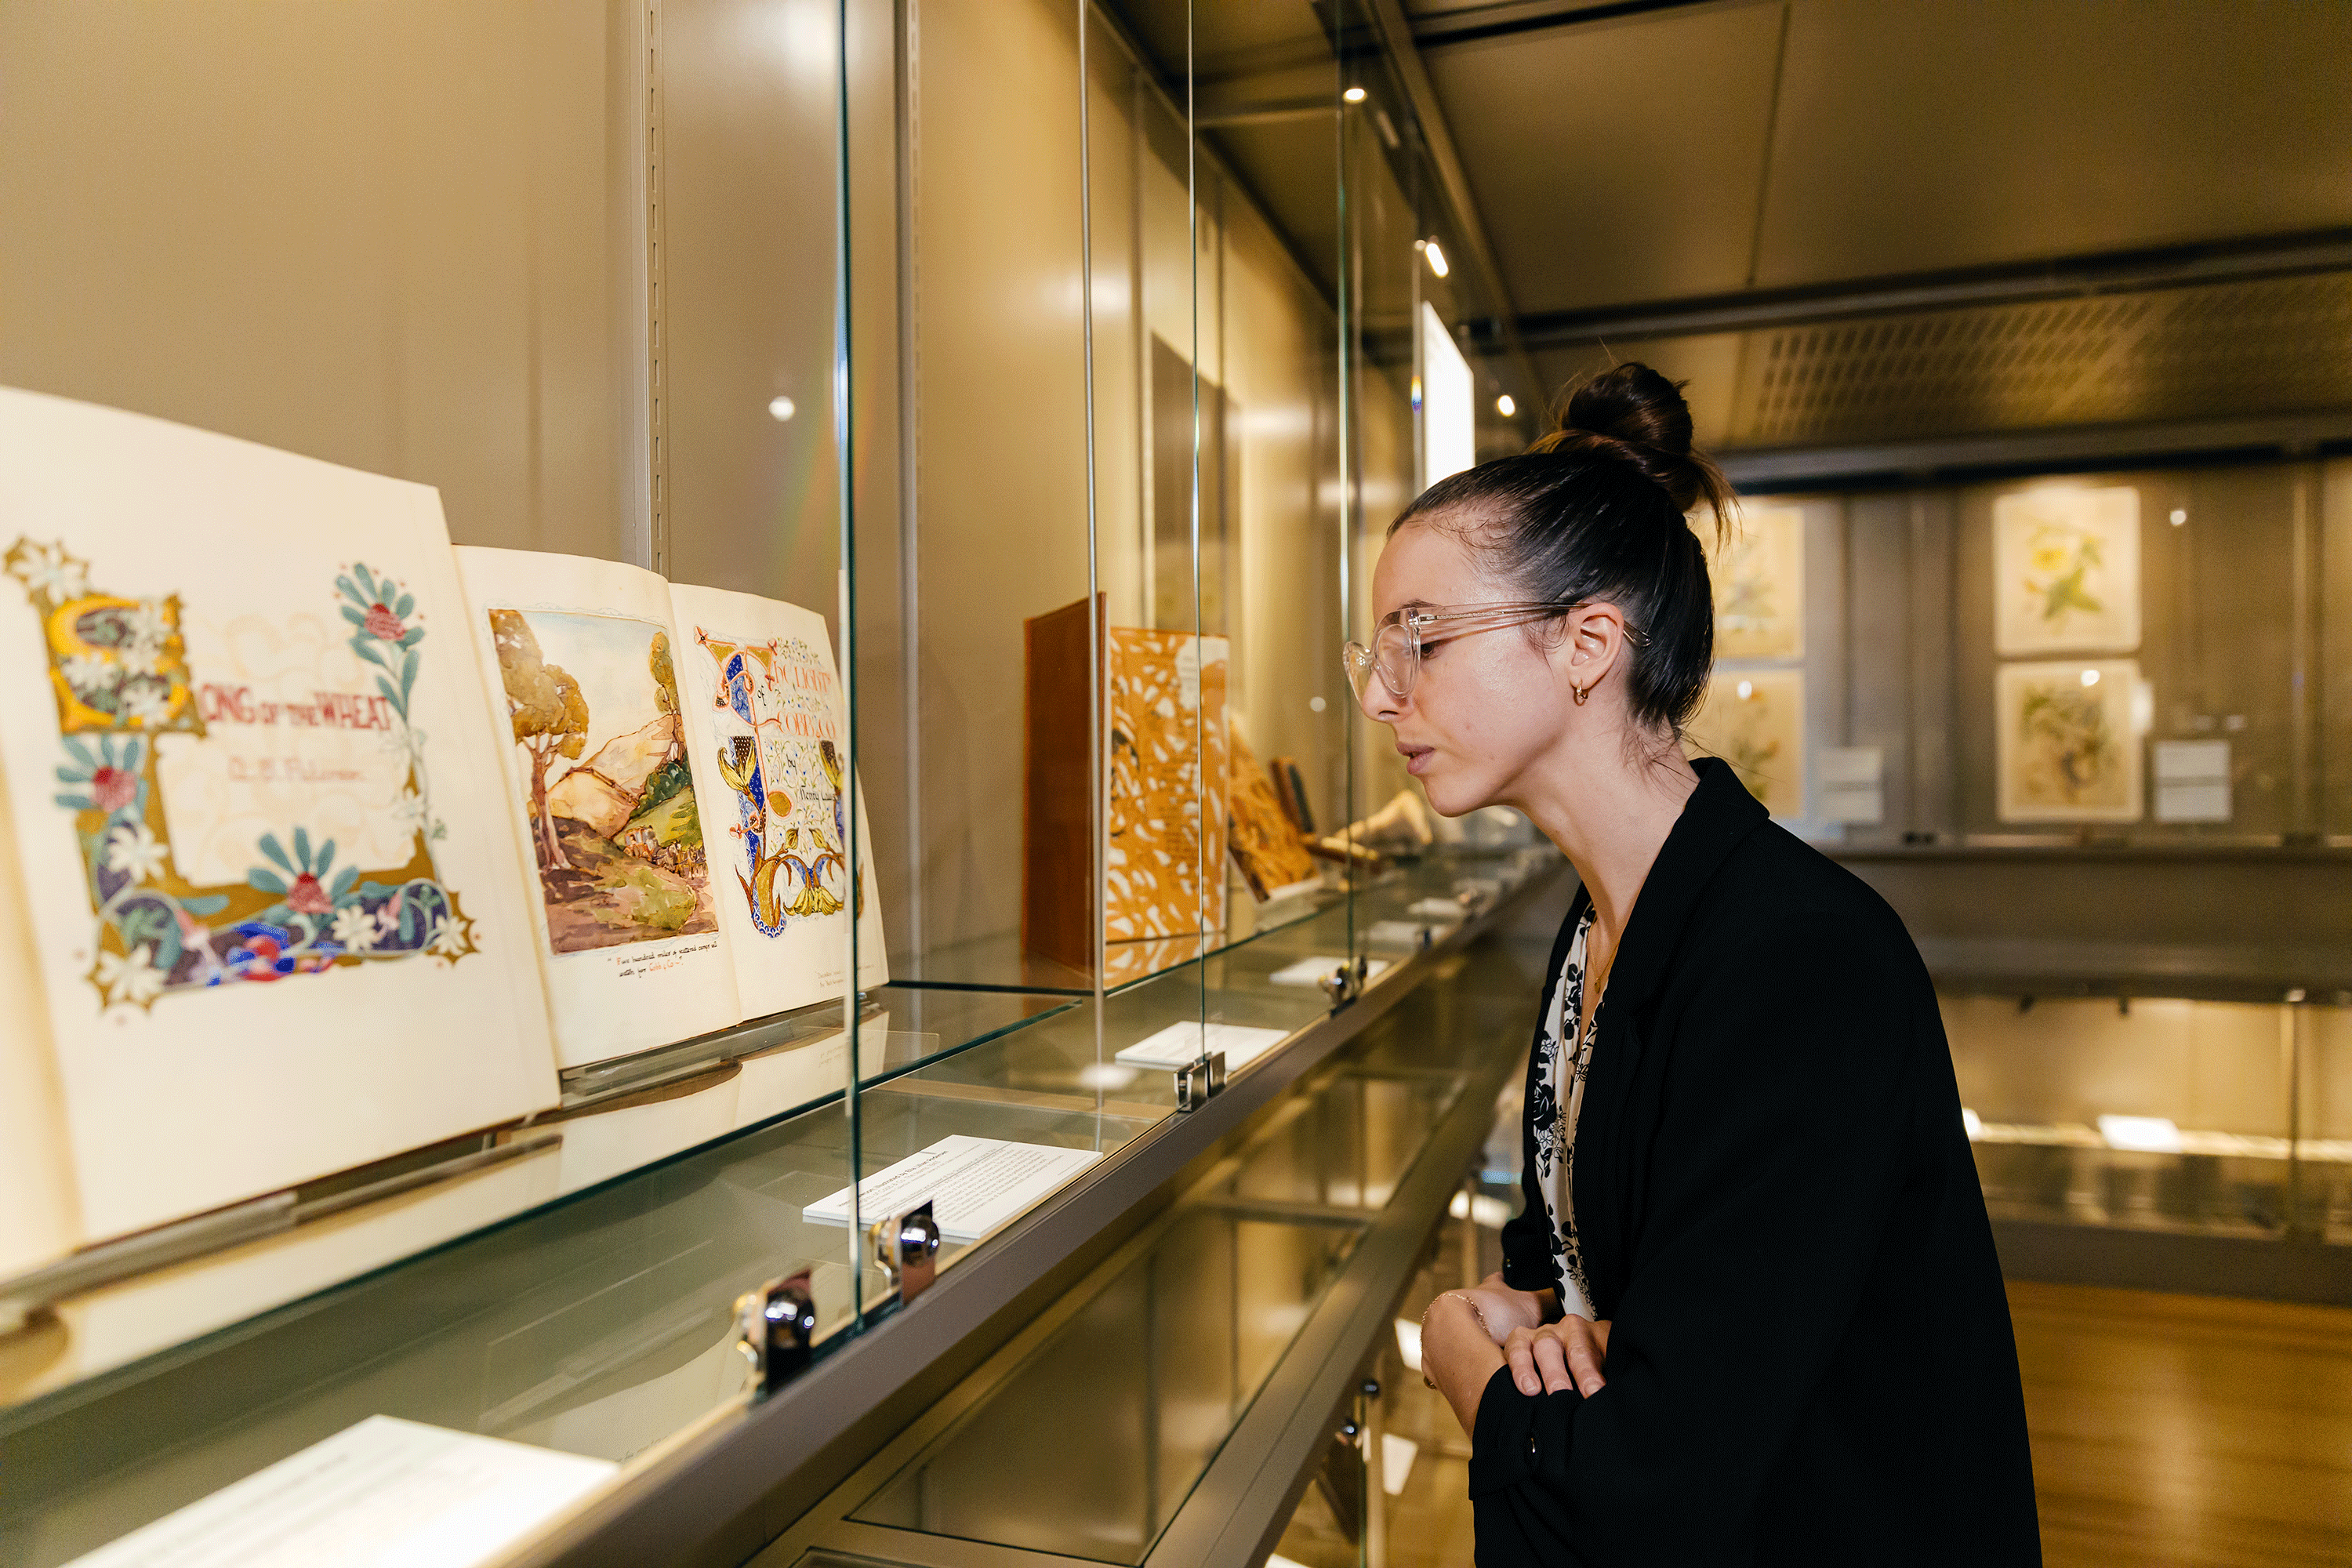 A woman looks down into a glass cabinet to inspect a display of historical books.